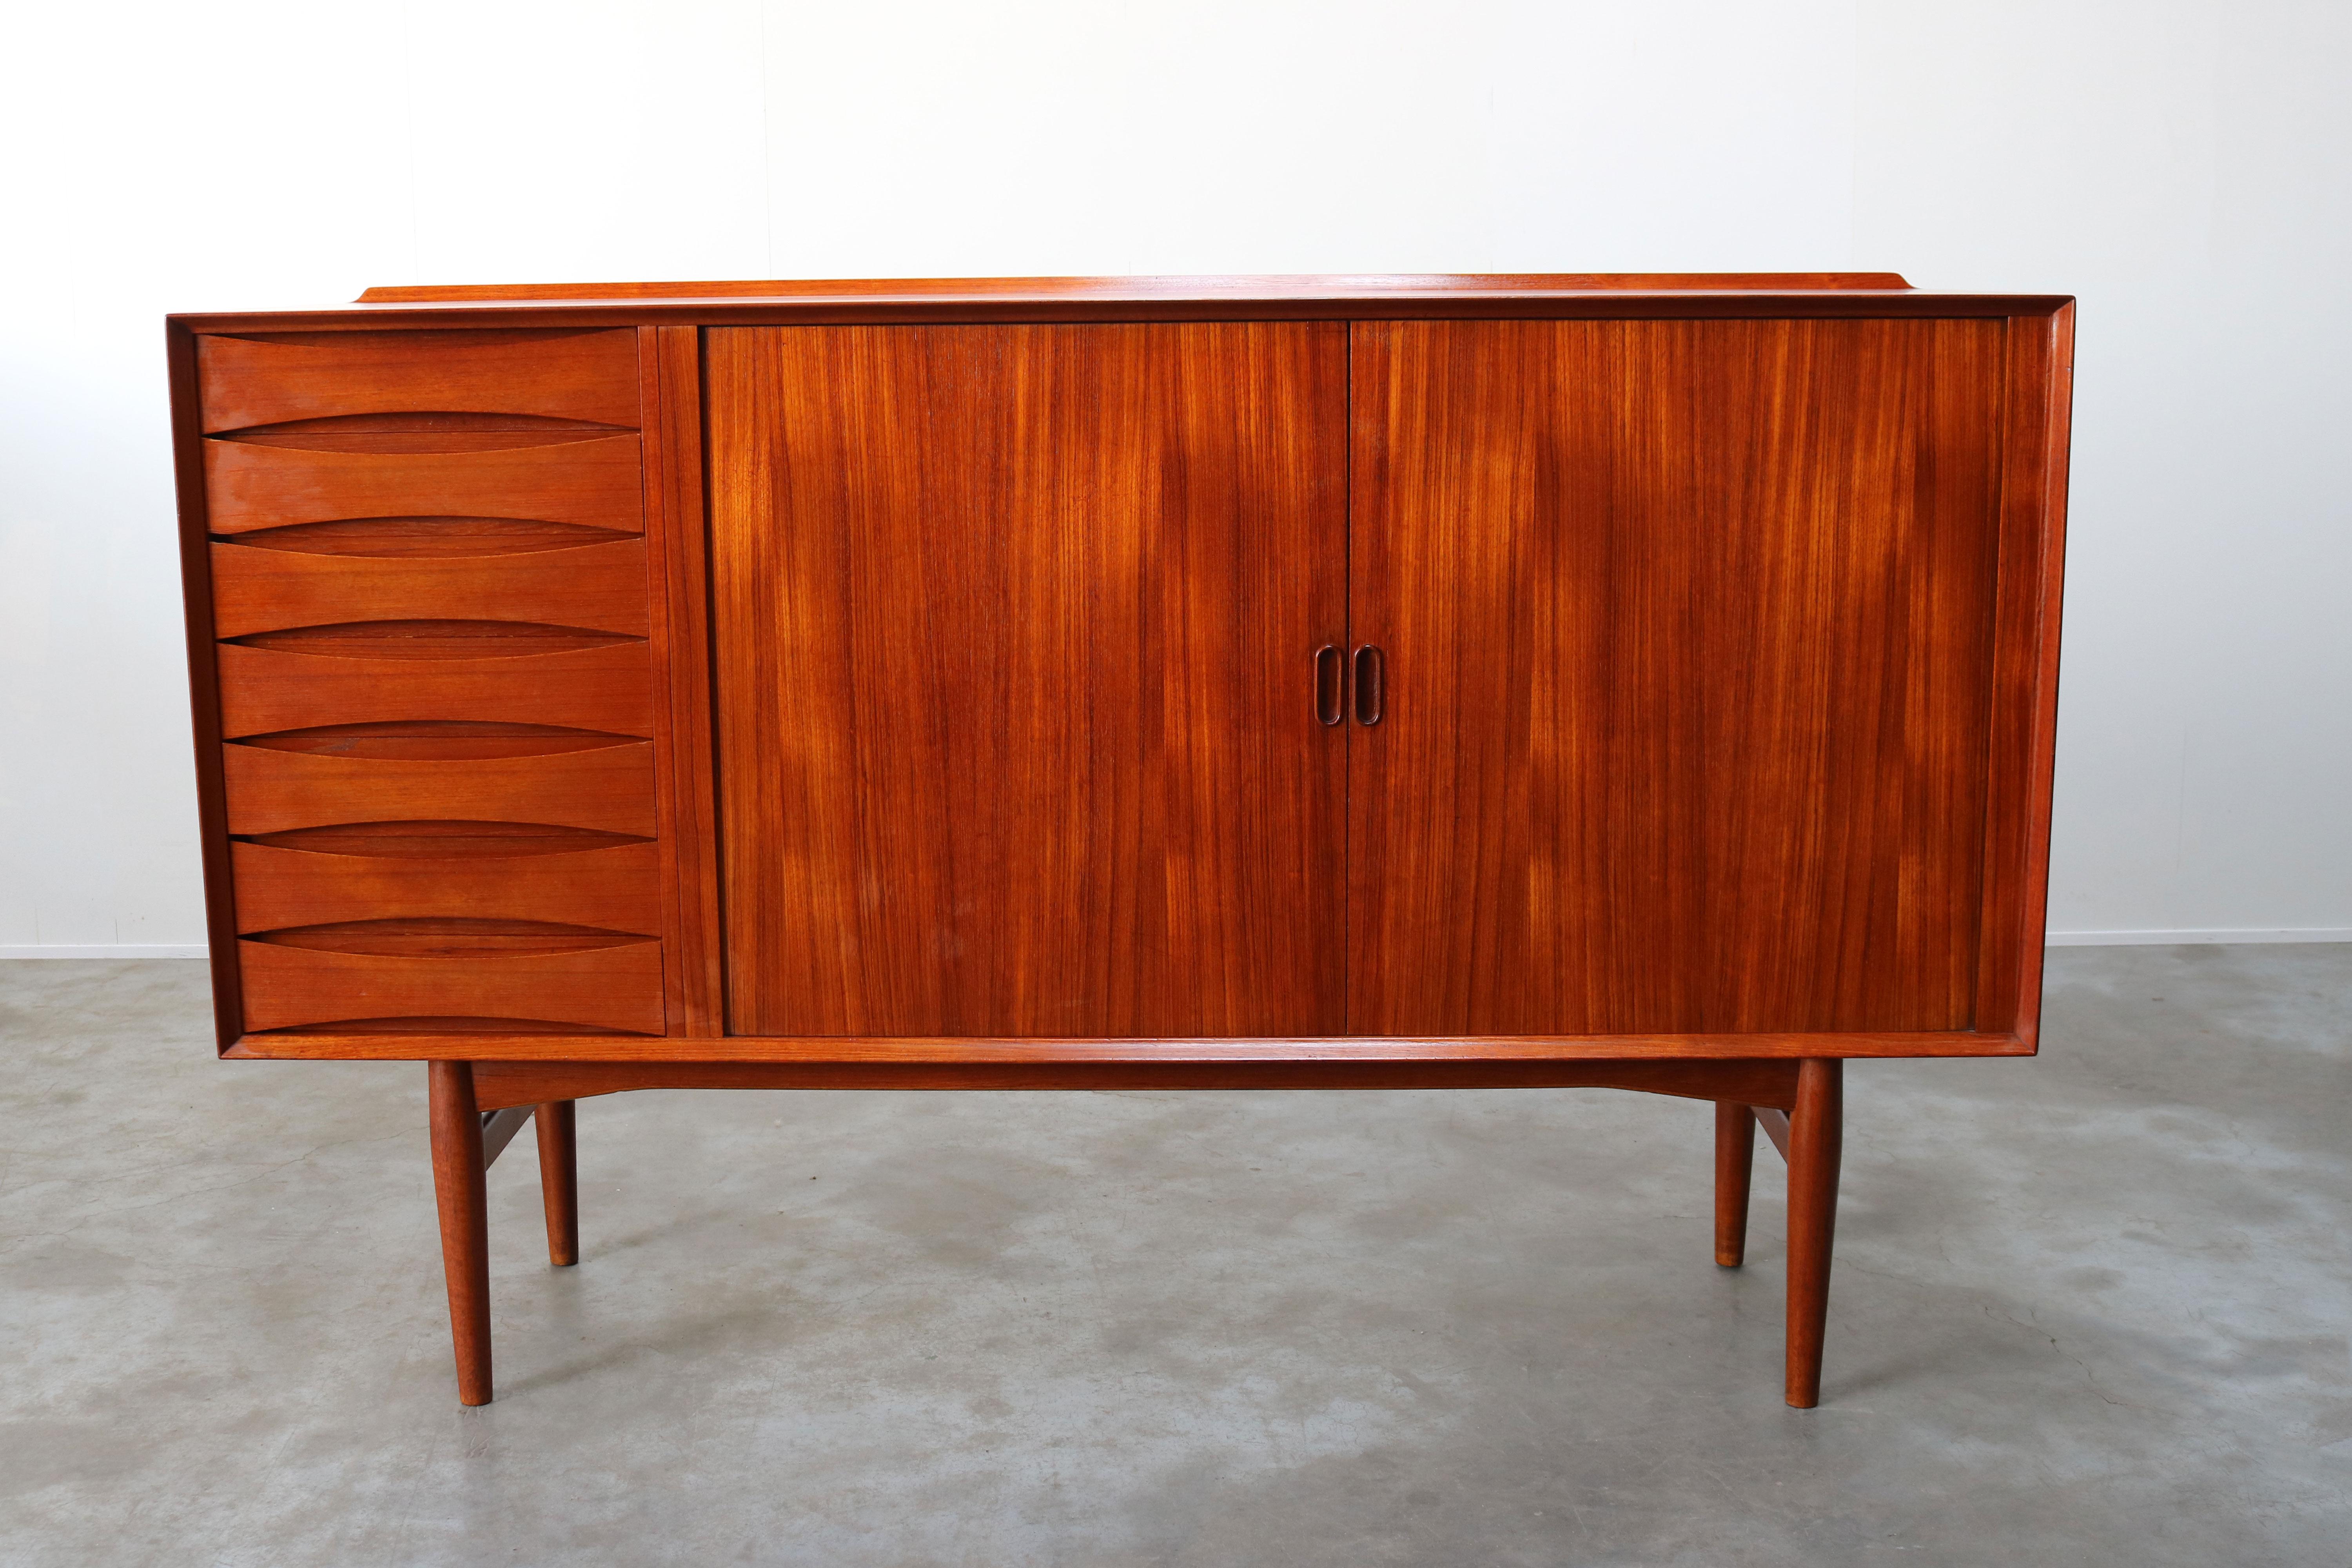 Wonderful Danish design highboard or cabinet model: OS63 by Arne Vodder for Sibast Mobler in the 1950s. This magnificent teak cabinet has multiple drawers and 2 tambour doors which disappear completely when opened. The cabinet is in solid teak with